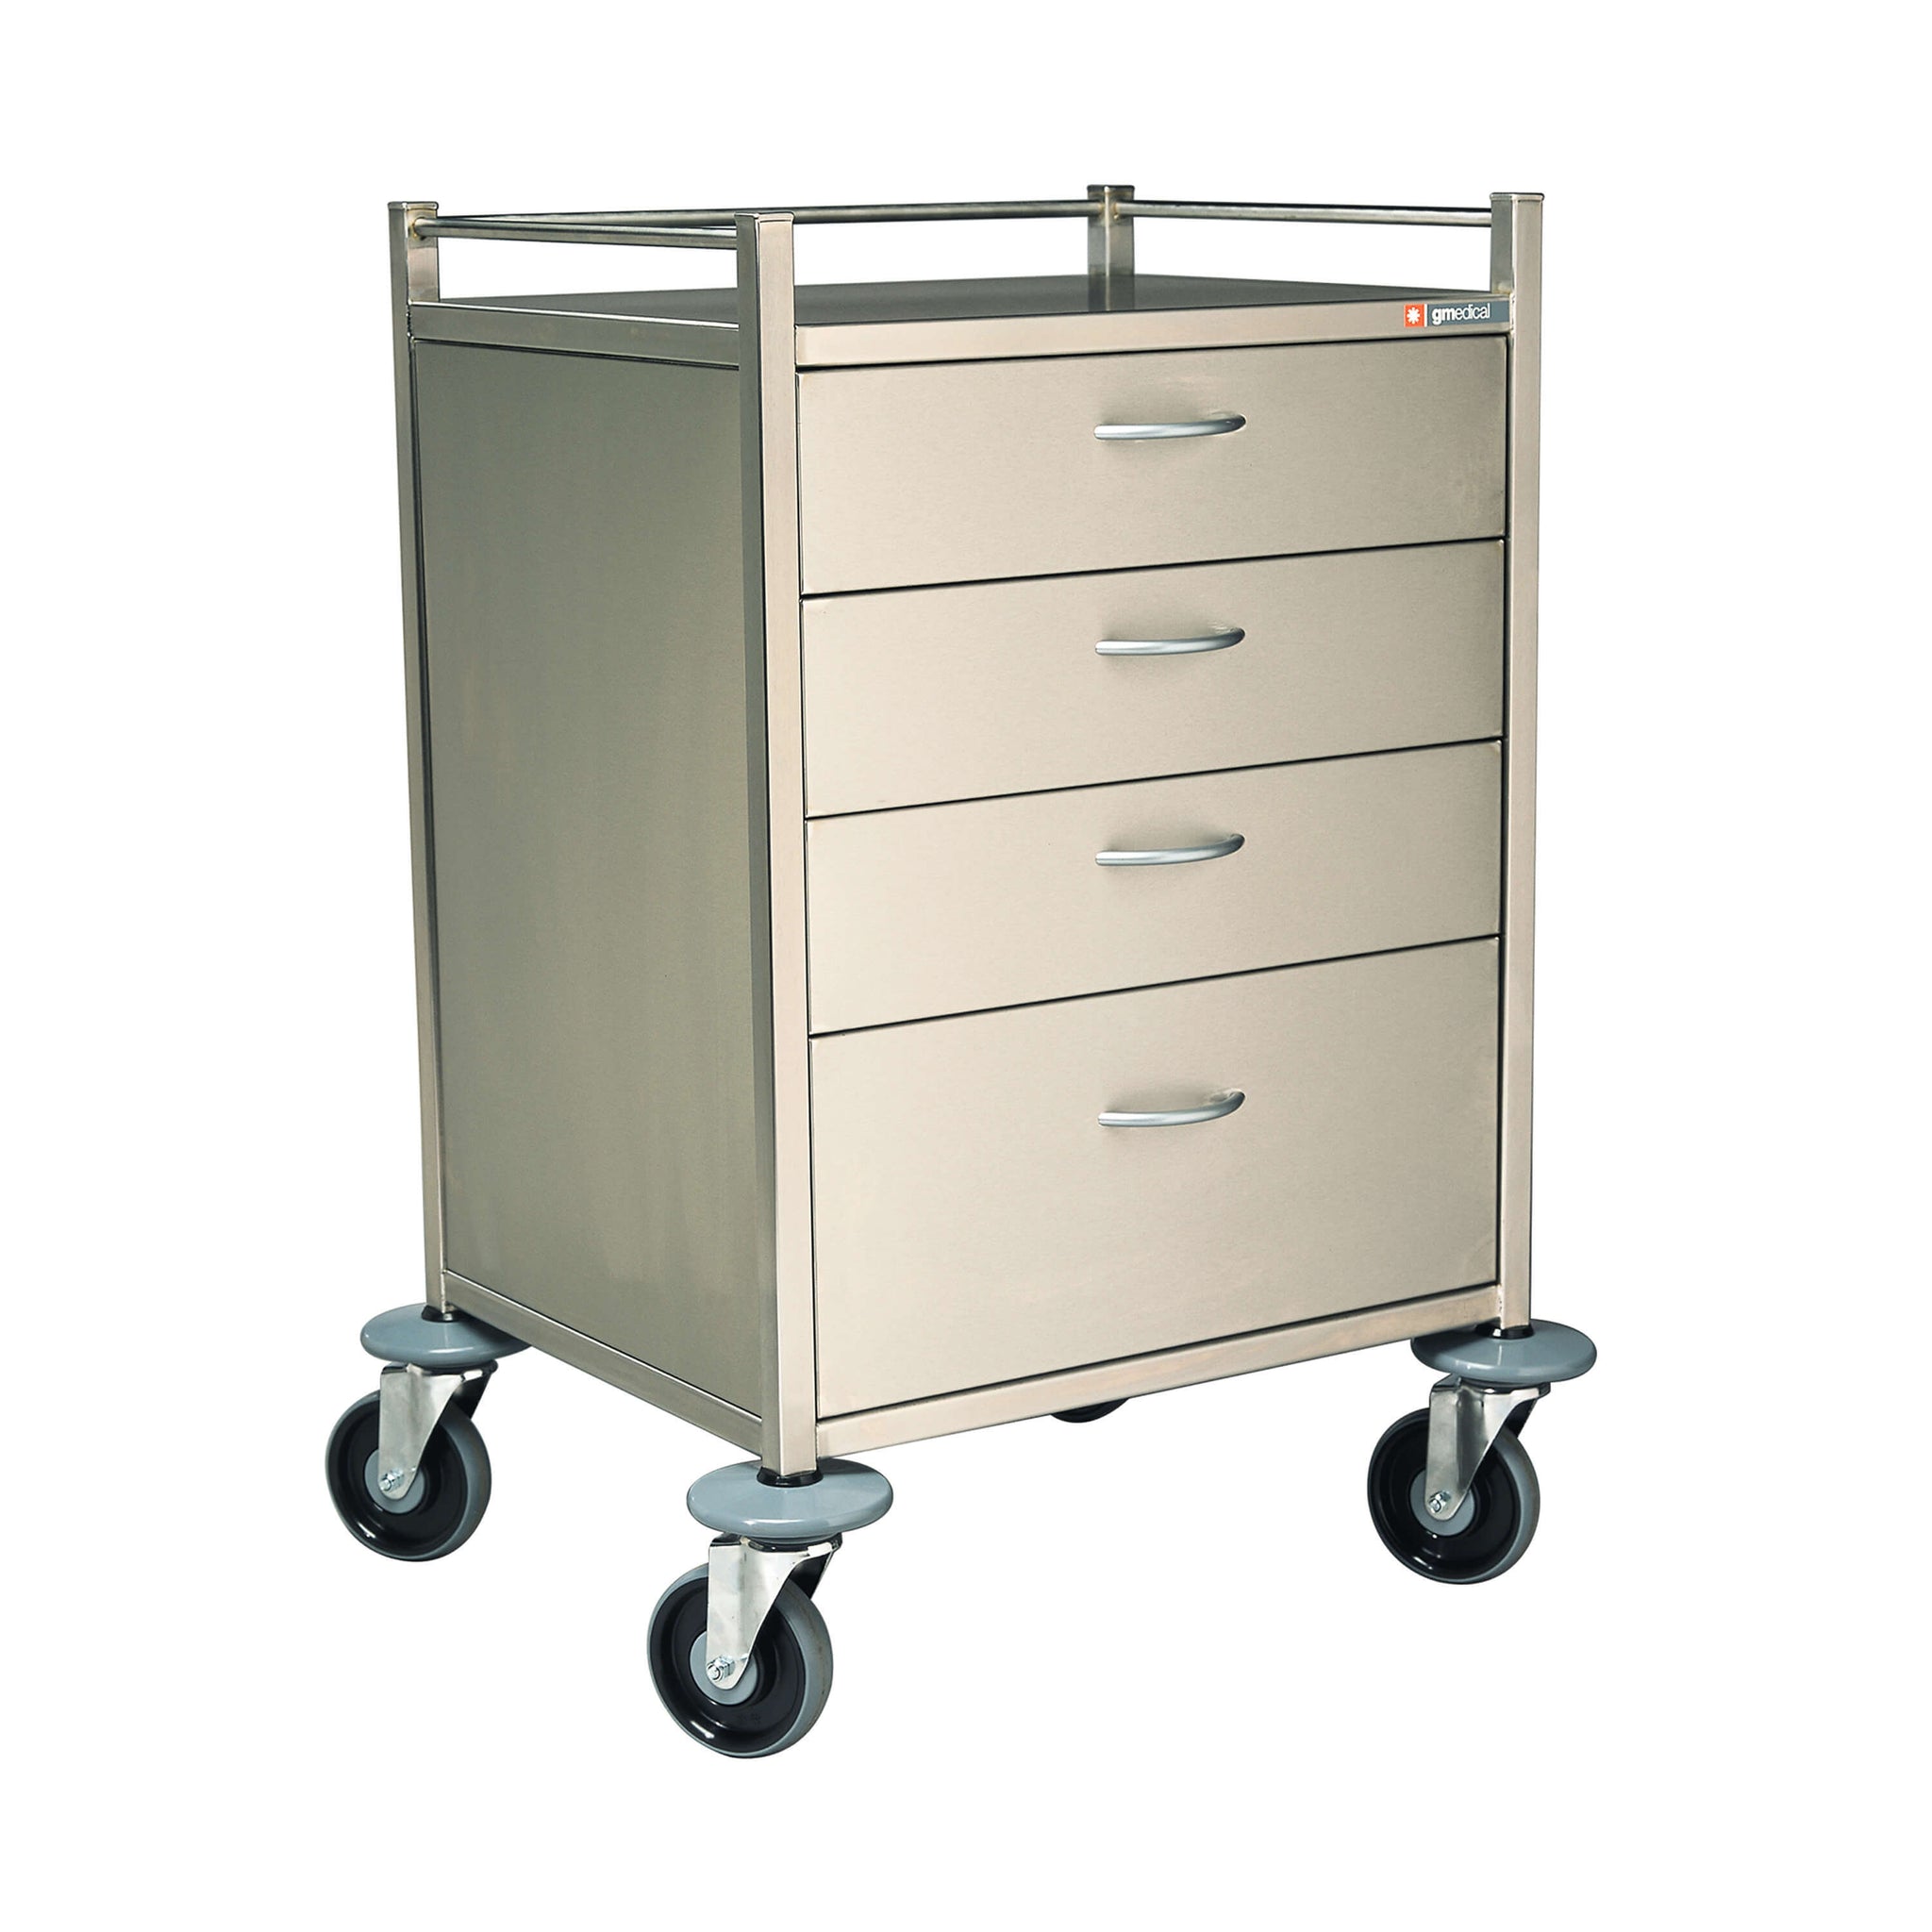 Anaesthetic Trolley - 4 Drawer, 600 X 490 X 900 mm